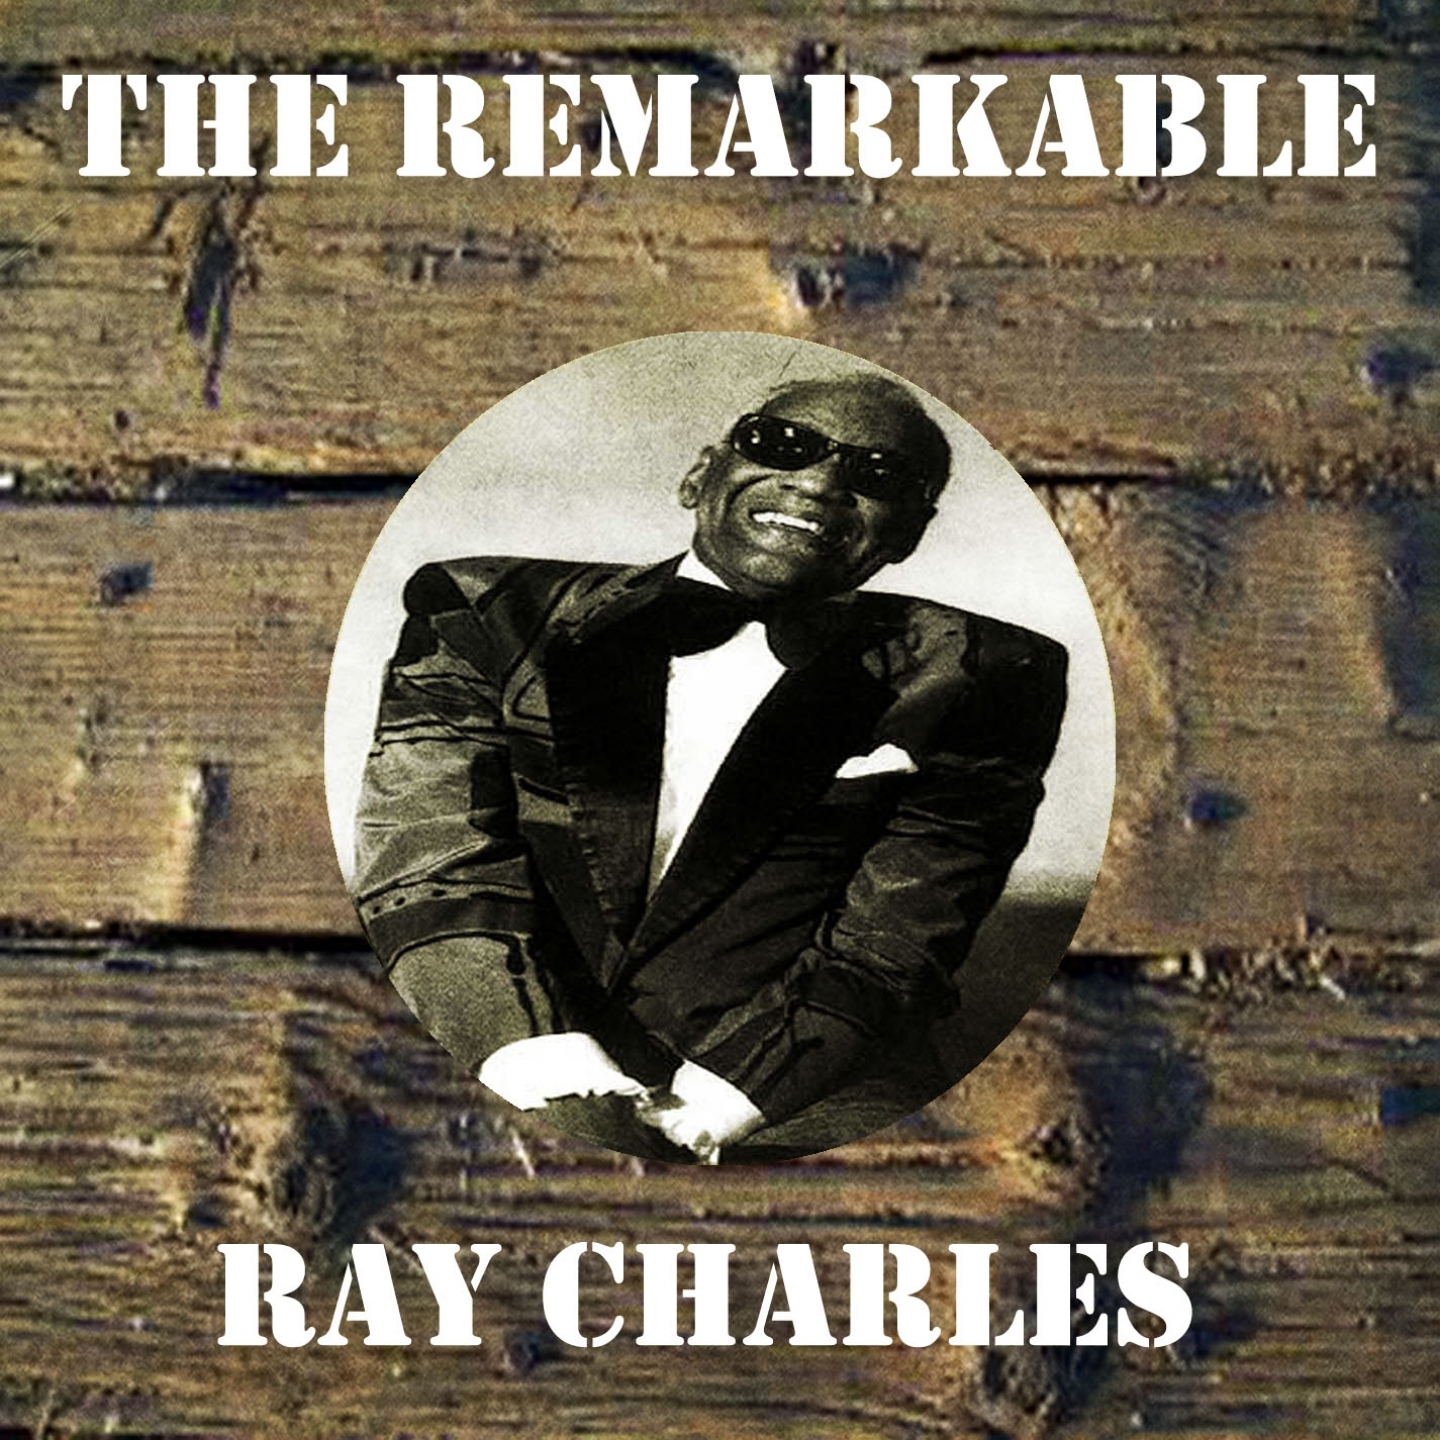 The Remarkable Ray Charles